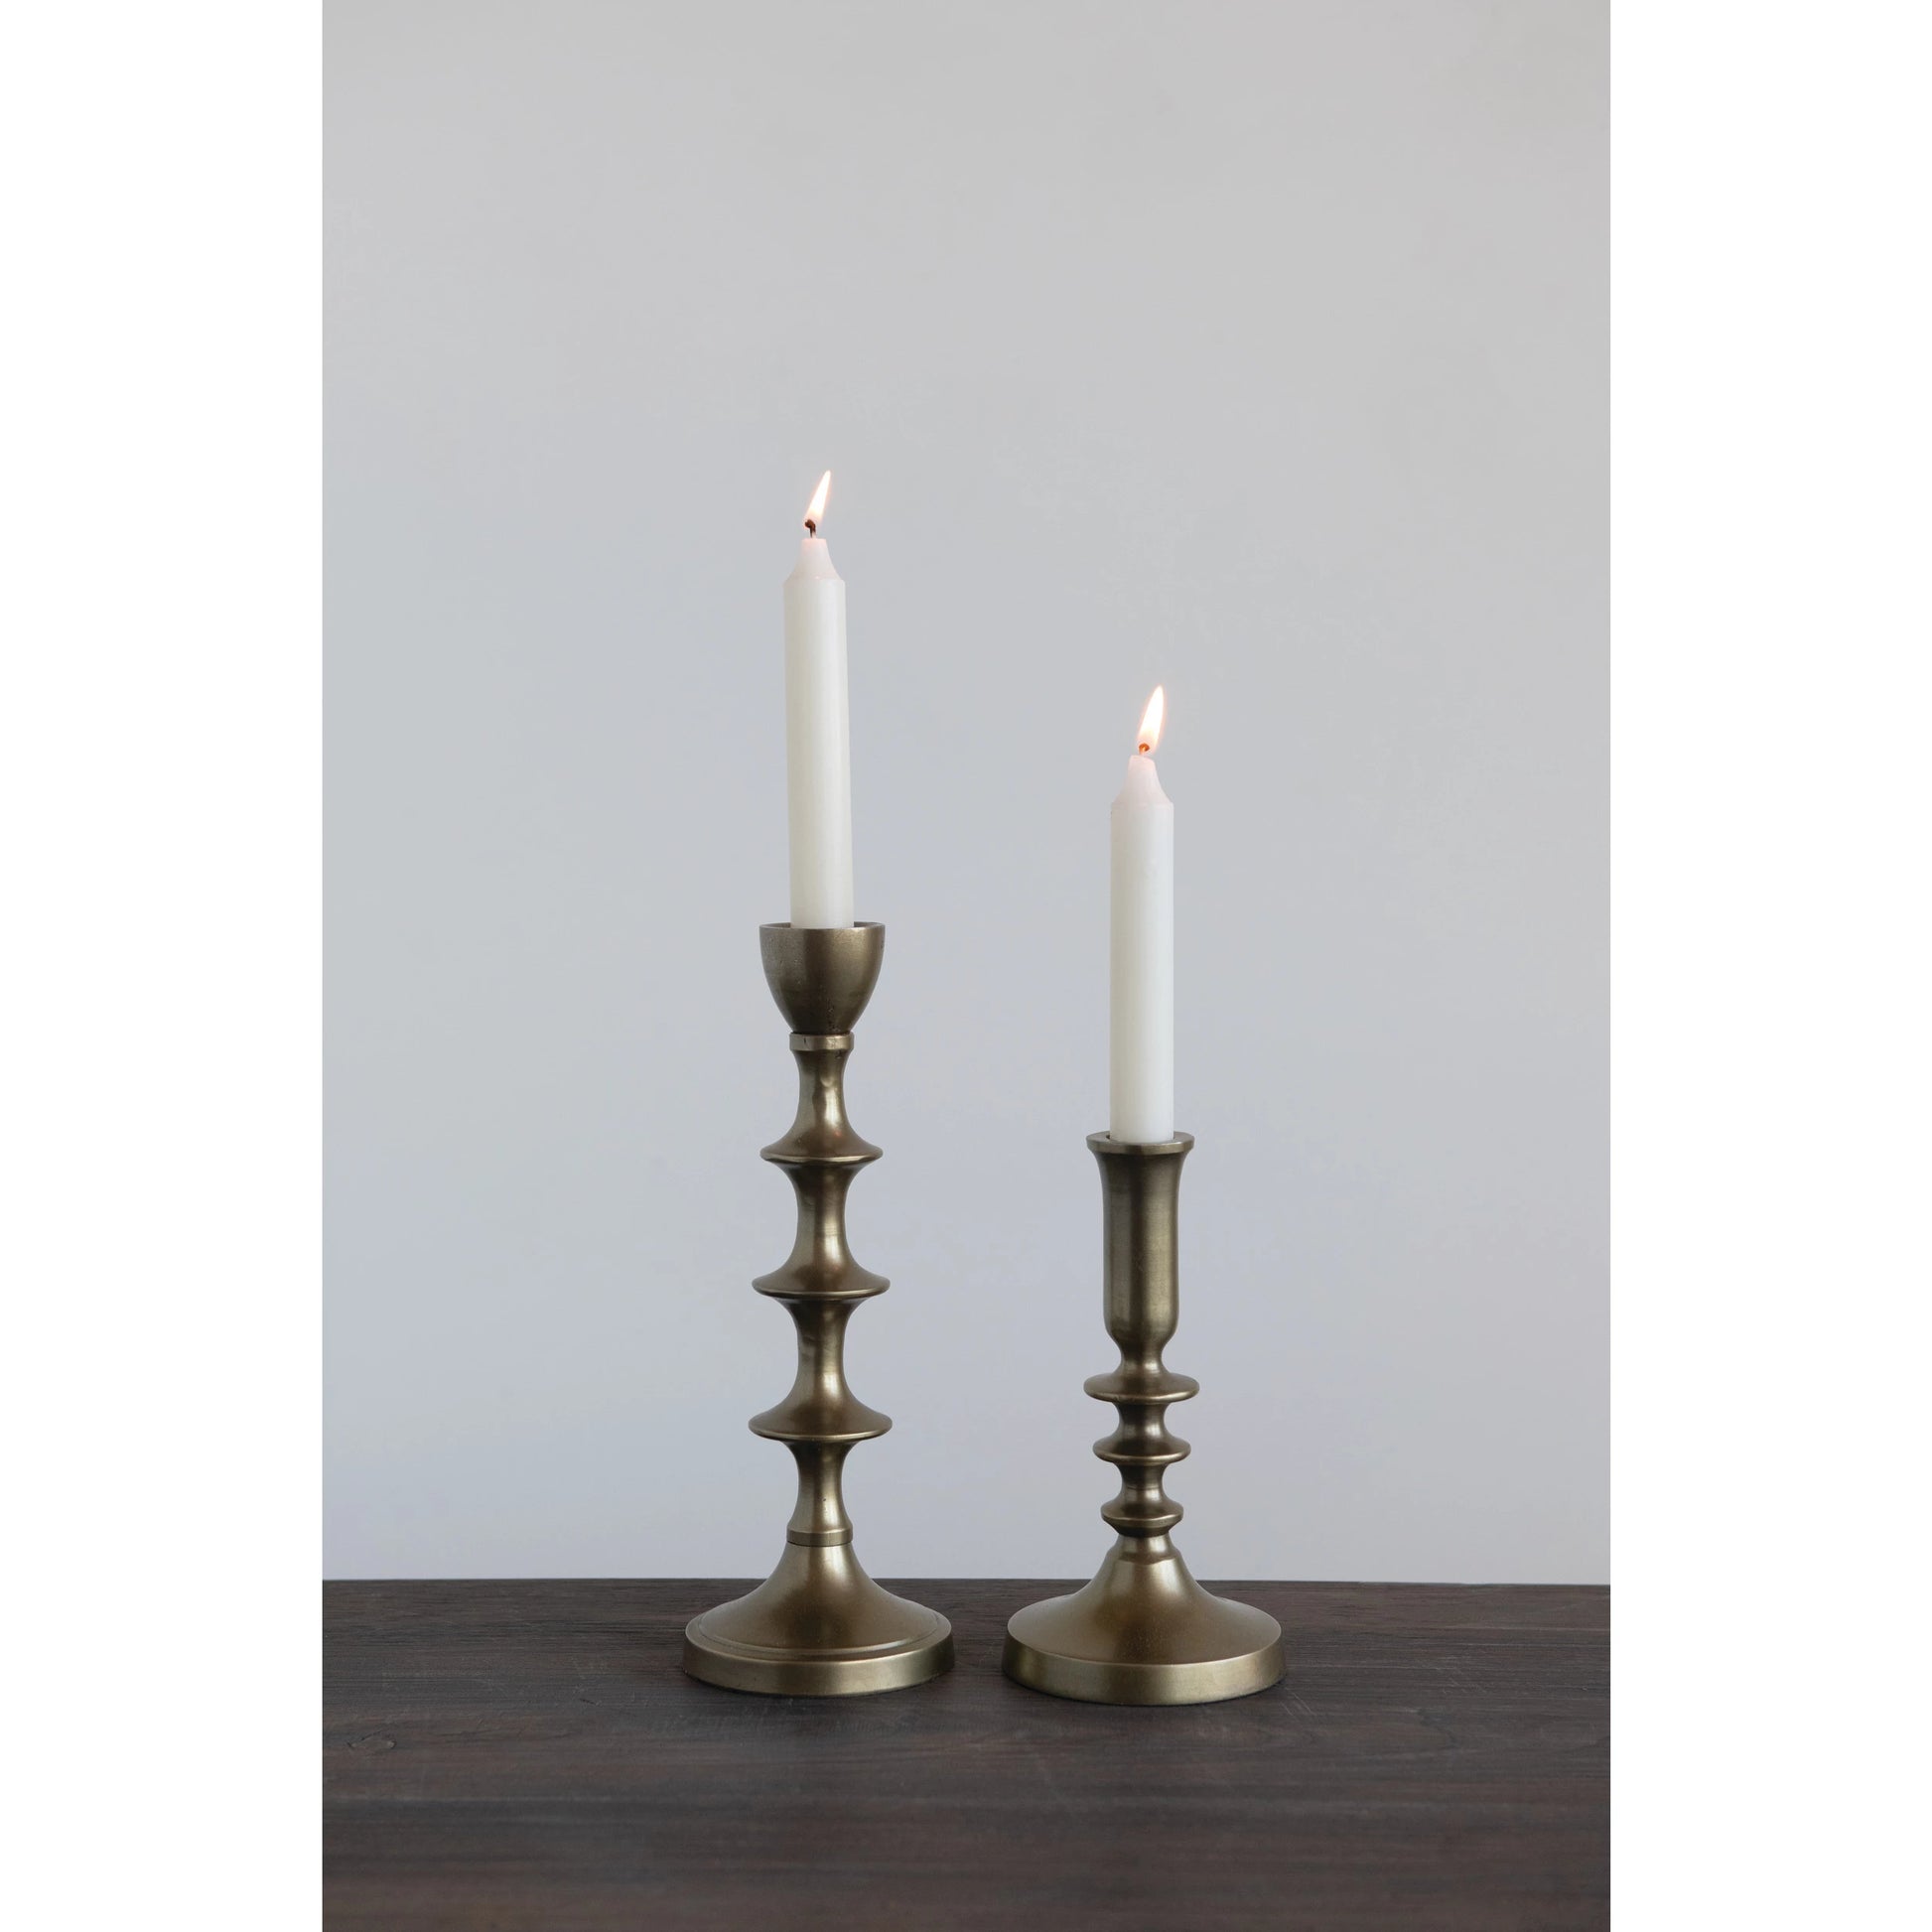 2 styles of antique gold taper holders with lit candles in them on a dark wooden table.